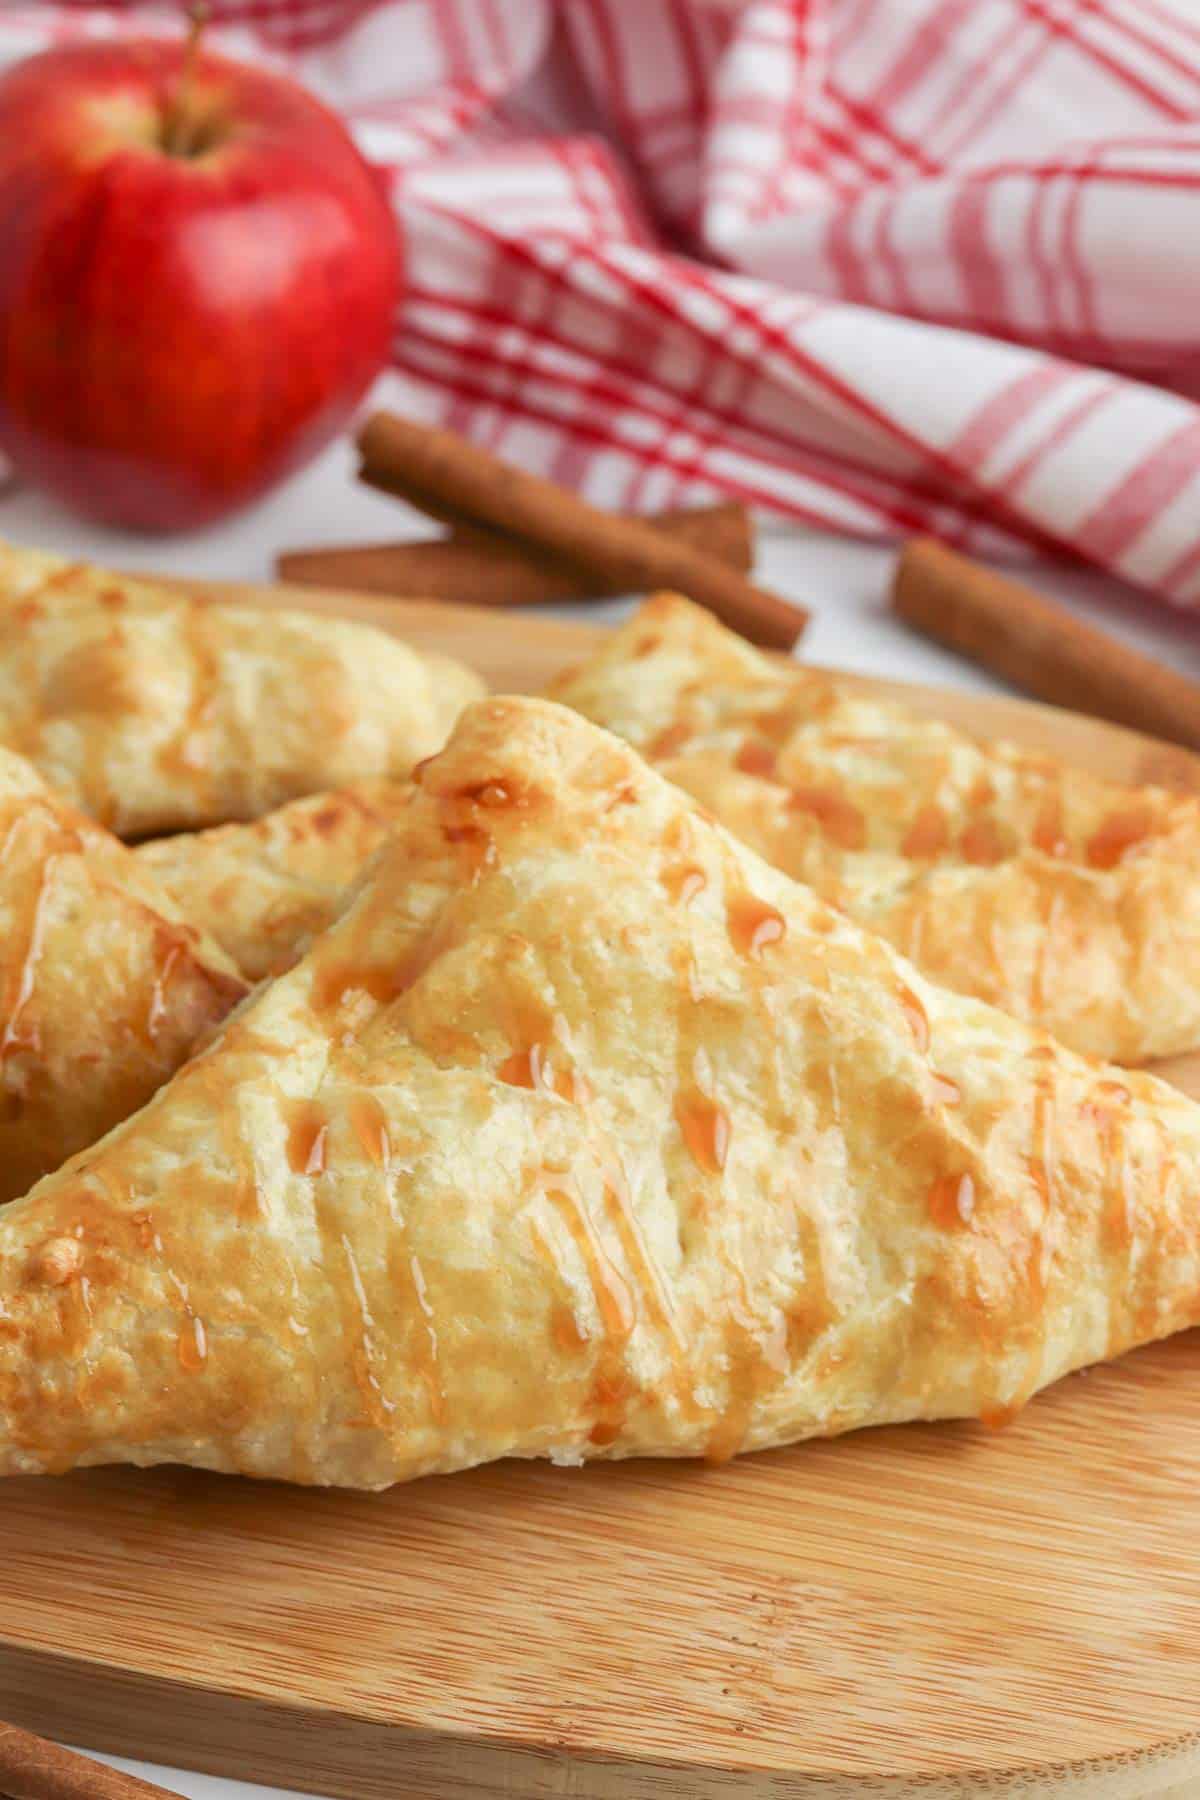 several apple turnovers on a wood cutting board.